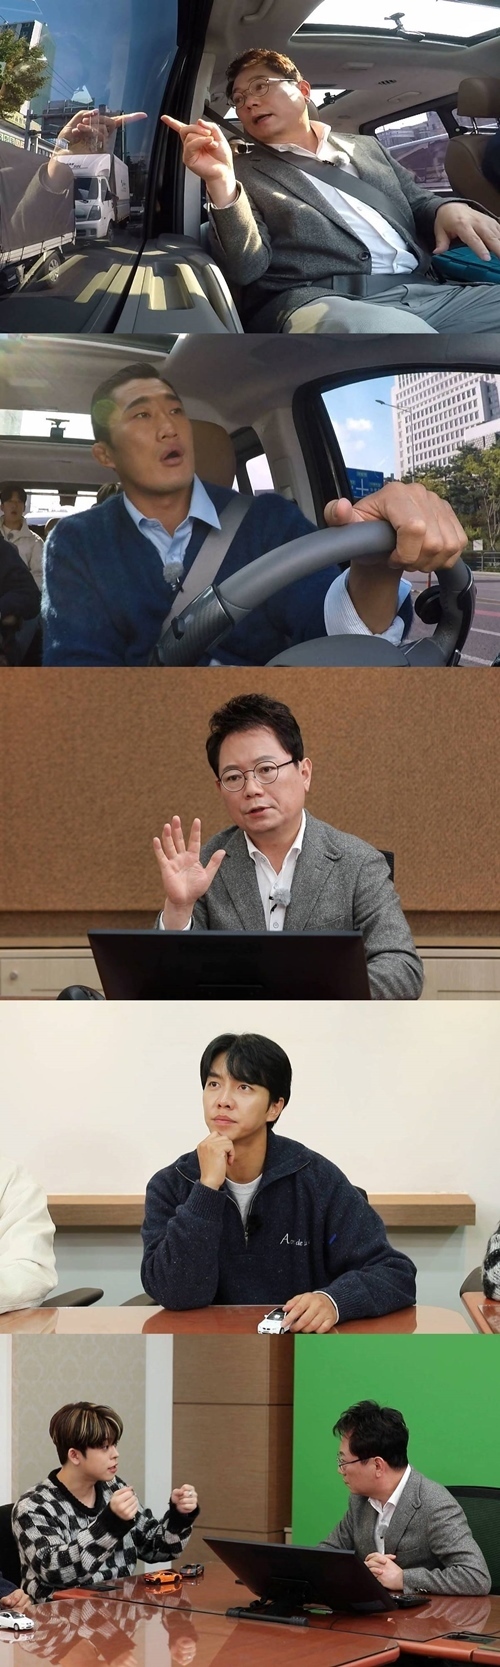 Kim Dong-Hyun, the best driver in 20 years, causes an unexpected situation while driving in an alley.On SBS All The Butlers, which is broadcasted at 6:30 pm on October 31, a Chinese character actor expert Lawyer appears as a master to make a safe Korea without Acident.On this day, Chinese character Acid specialist Lawyer appears as a master and learns about the reality of Korean traffic with members.The members went into actual driving with the master to directly confirm the current traffic situation in Korea.On the road where the cars are crowded, it is said that unexpected tensions such as reverse driving have been unfolded so that the master of the chinese character says dangerous!Even Kim Dong-Hyun, the best driver for 20 years, has been embarrassed by the unexpected situation during the alleyway driving, which has embarrassed the master of the Chinese character.We are curious about what the actual situation on the road in our daily life, where various risks that we do not think about are lurking.